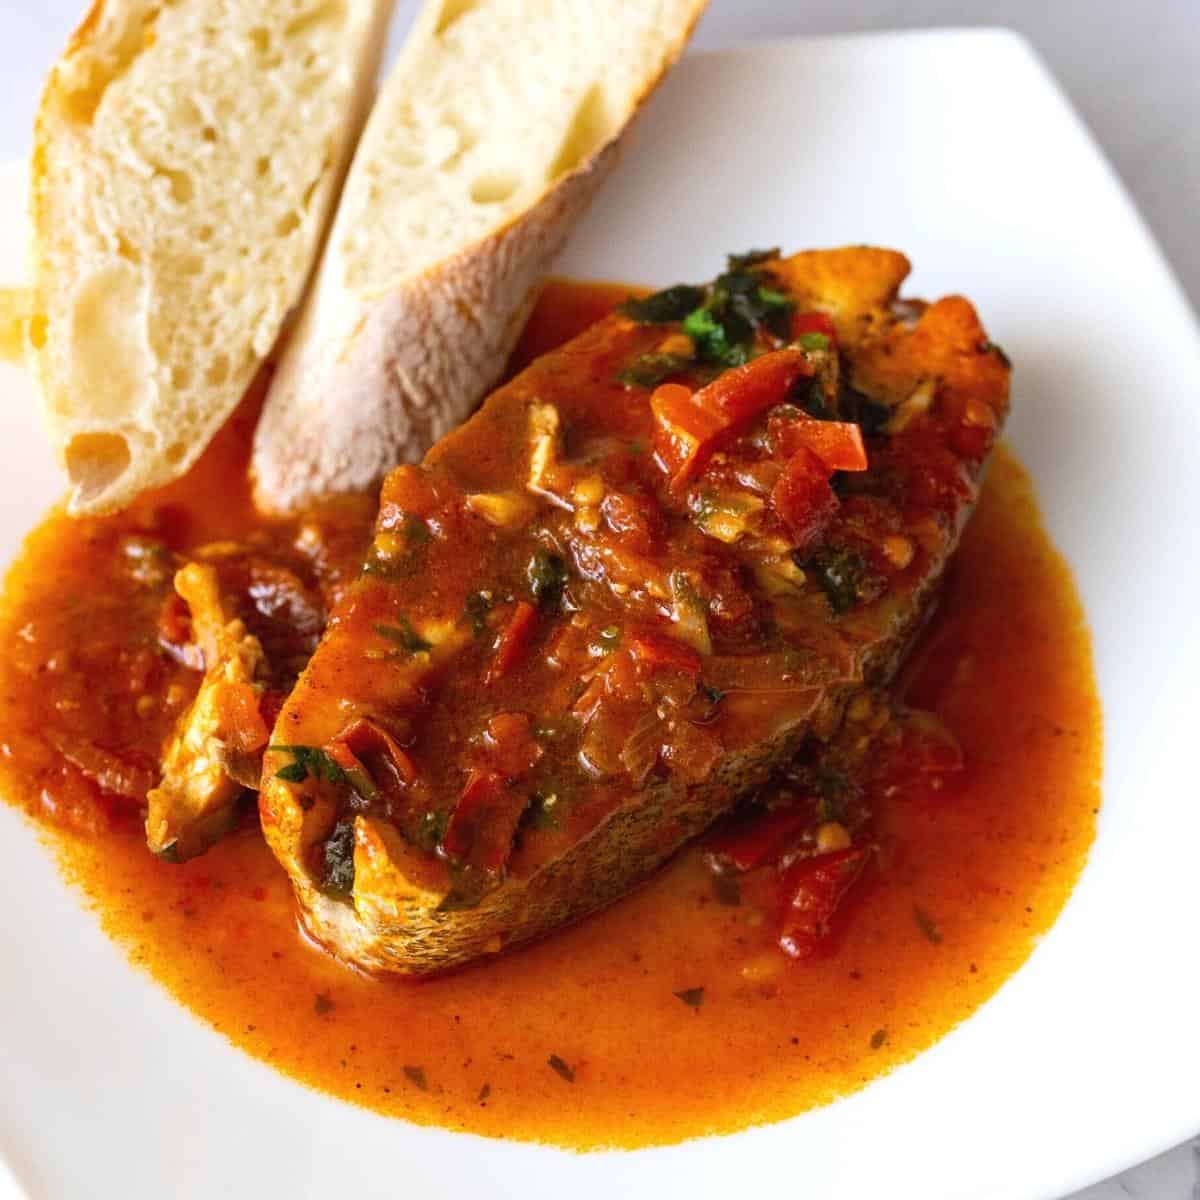 A plate with fish in tomato sauce.